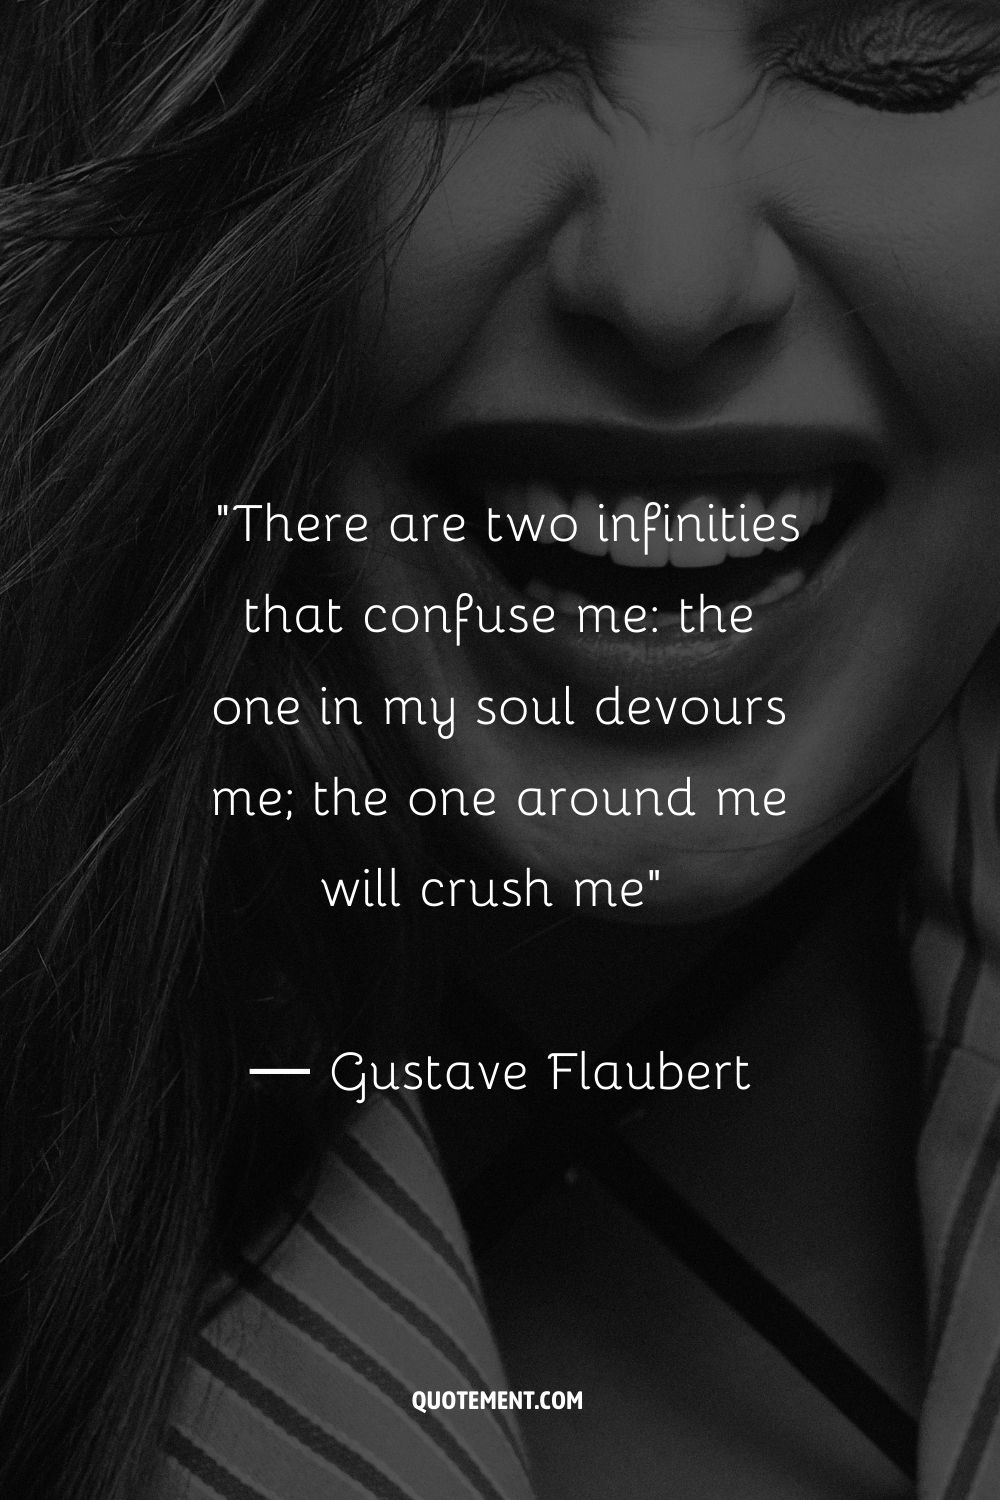 There are two infinities that confuse me the one in my soul devours me; the one around me will crush me